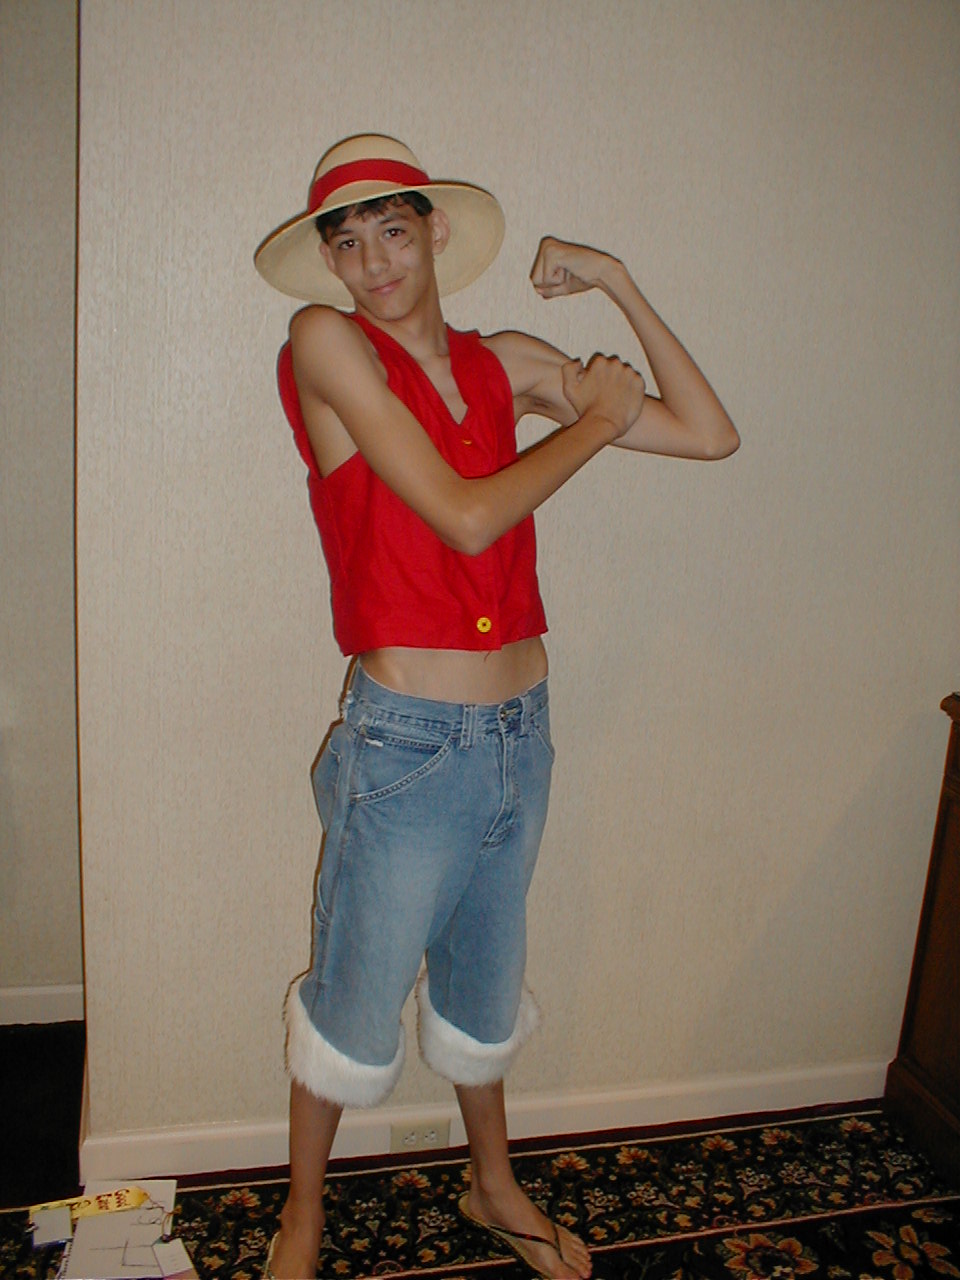 Michael Nguyen as Monkey D. Luffy from One Piece